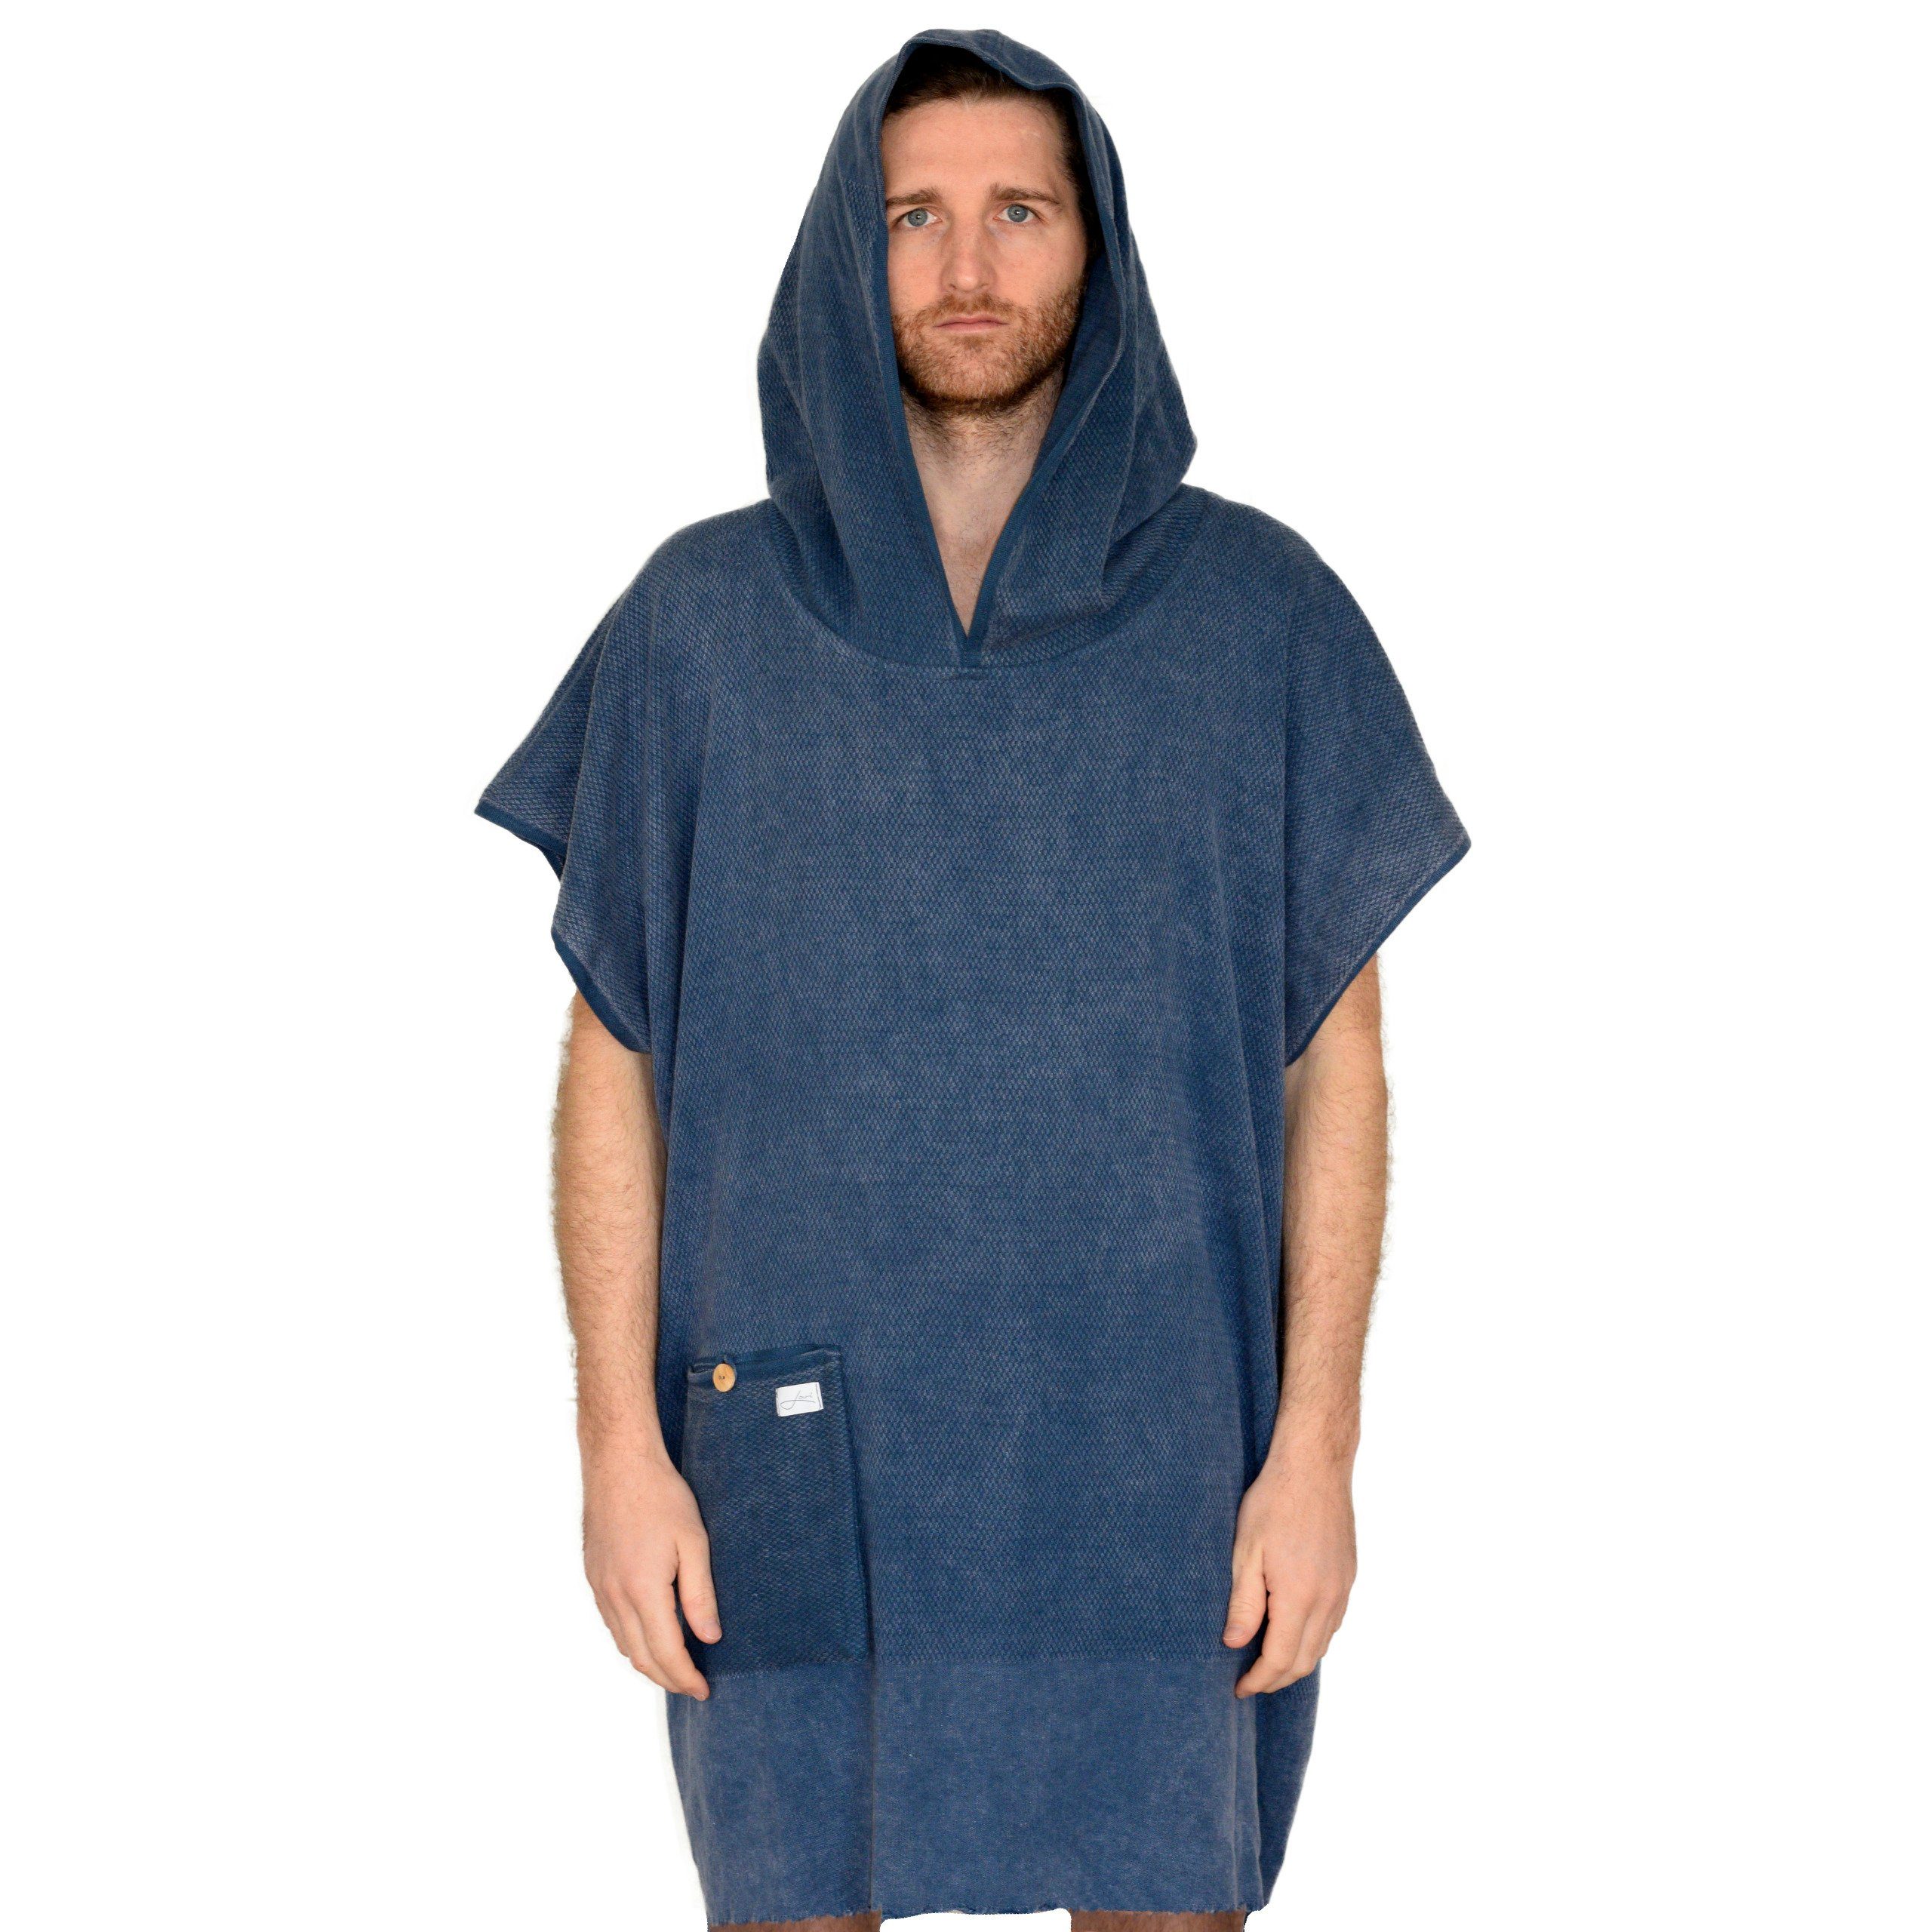 Lou-i Badeponcho Badeponcho Made in Germany Surfponcho (leicht & schnell trocken), Kapuze